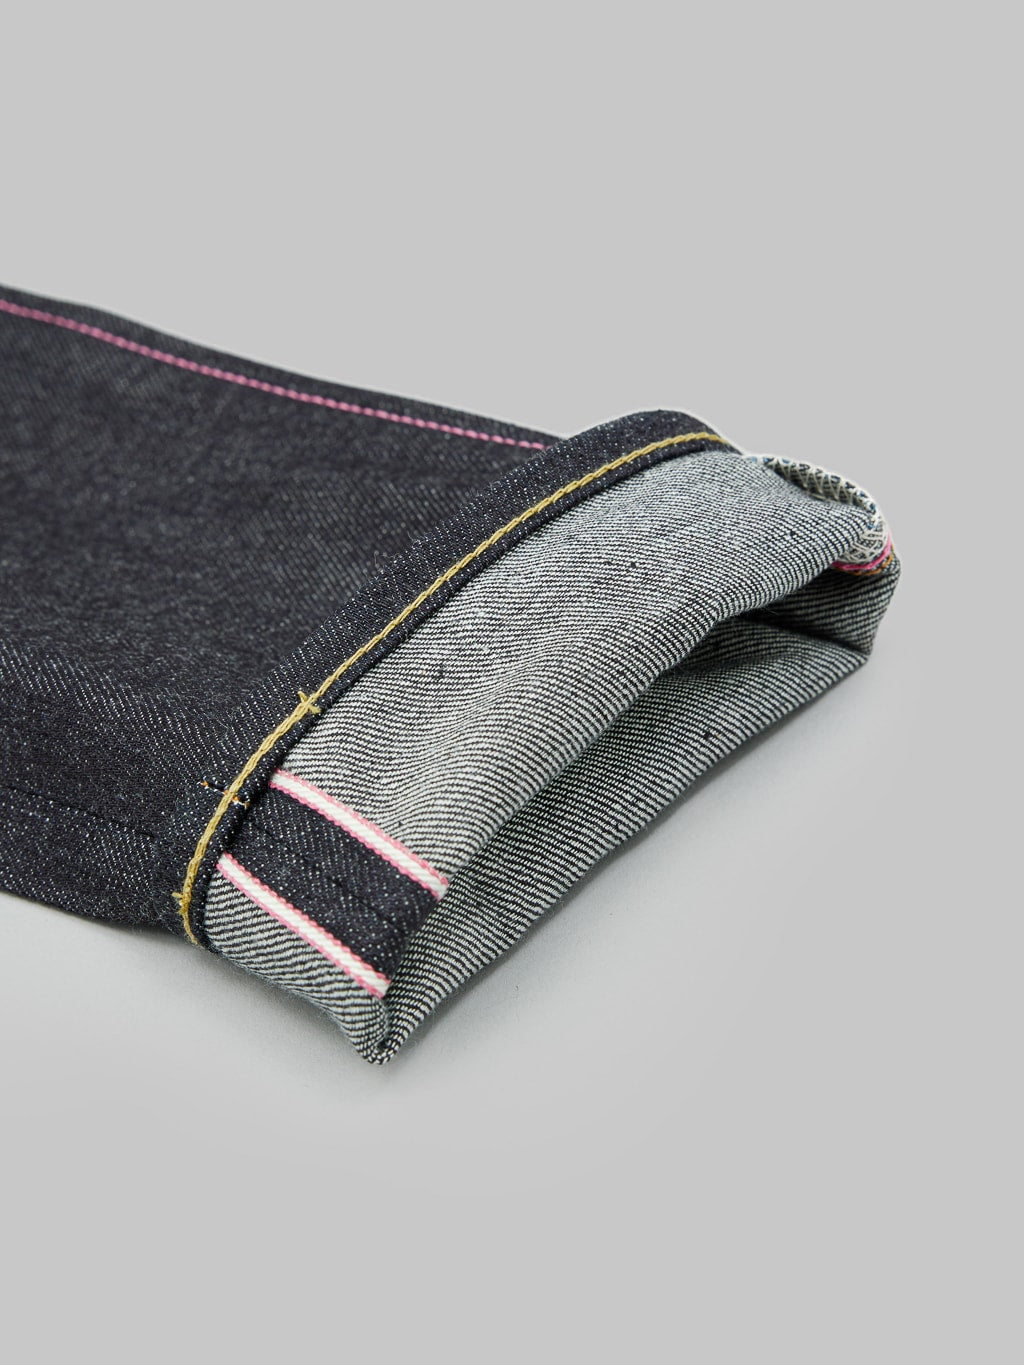 Momotaro 0405 12 going to batle 12oz high Tapered Jeans pink selvedge